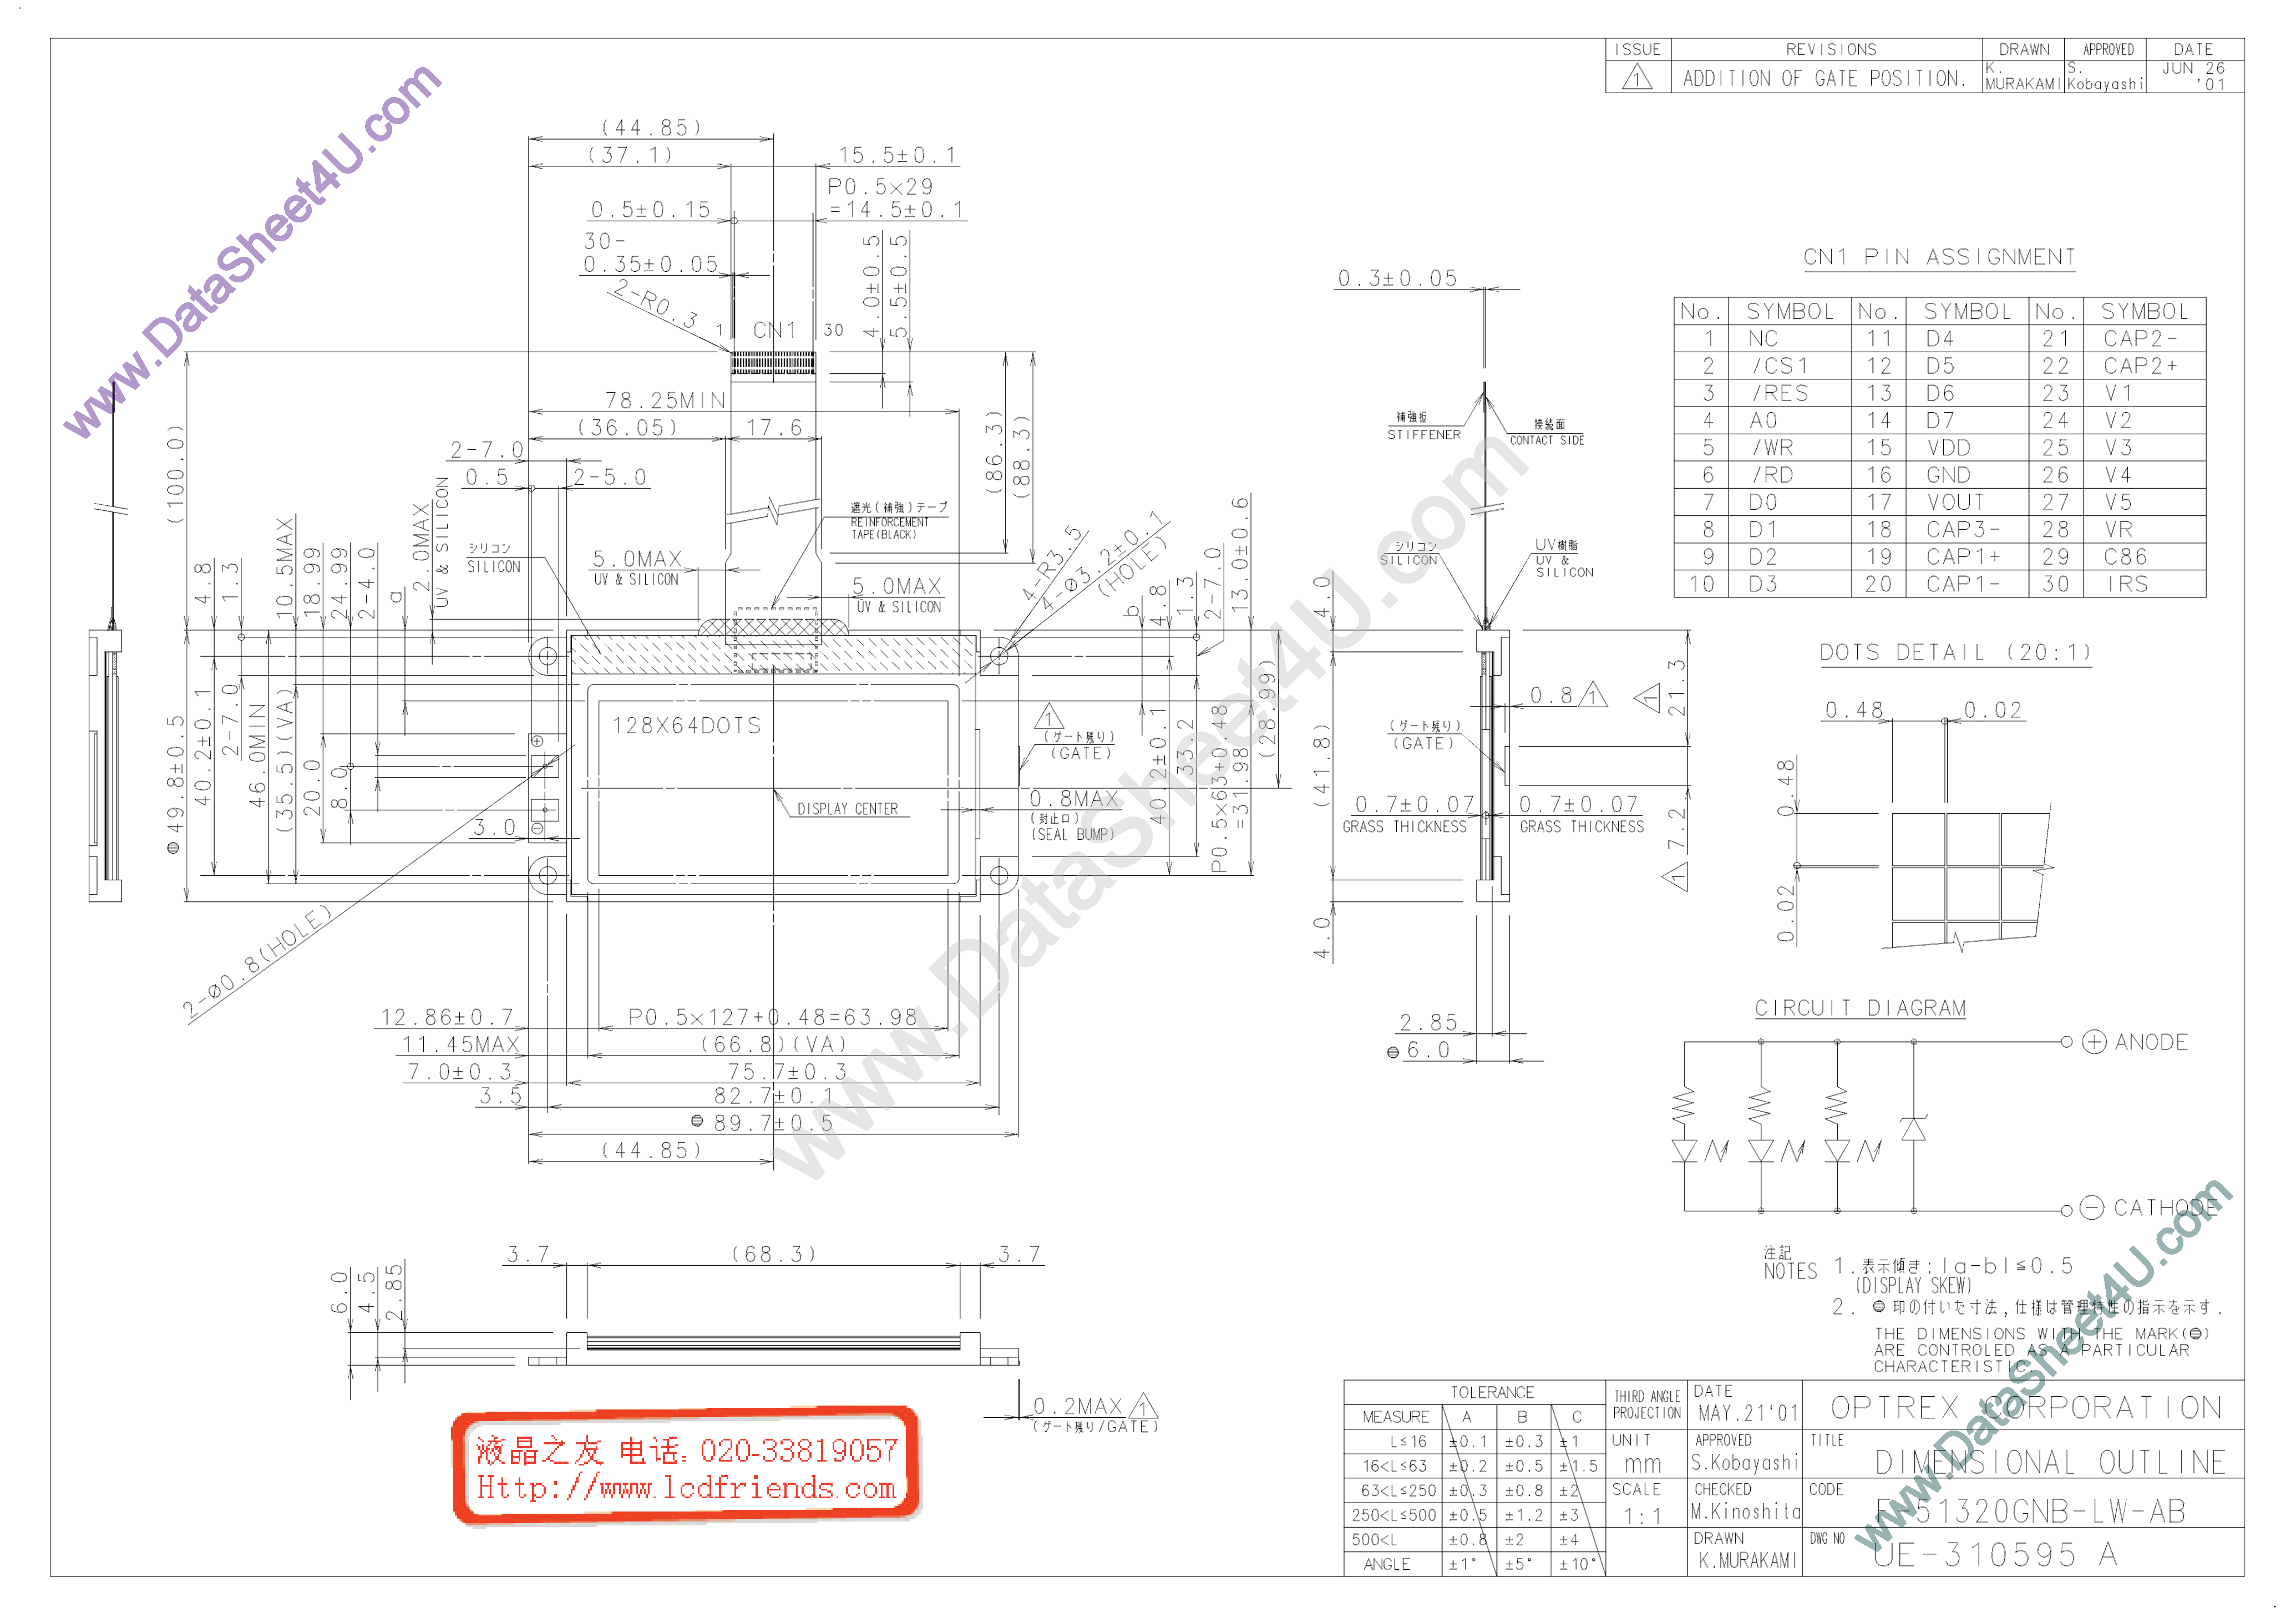 Datasheet F-51320GNB-LY-AB - LCD_Module page 1